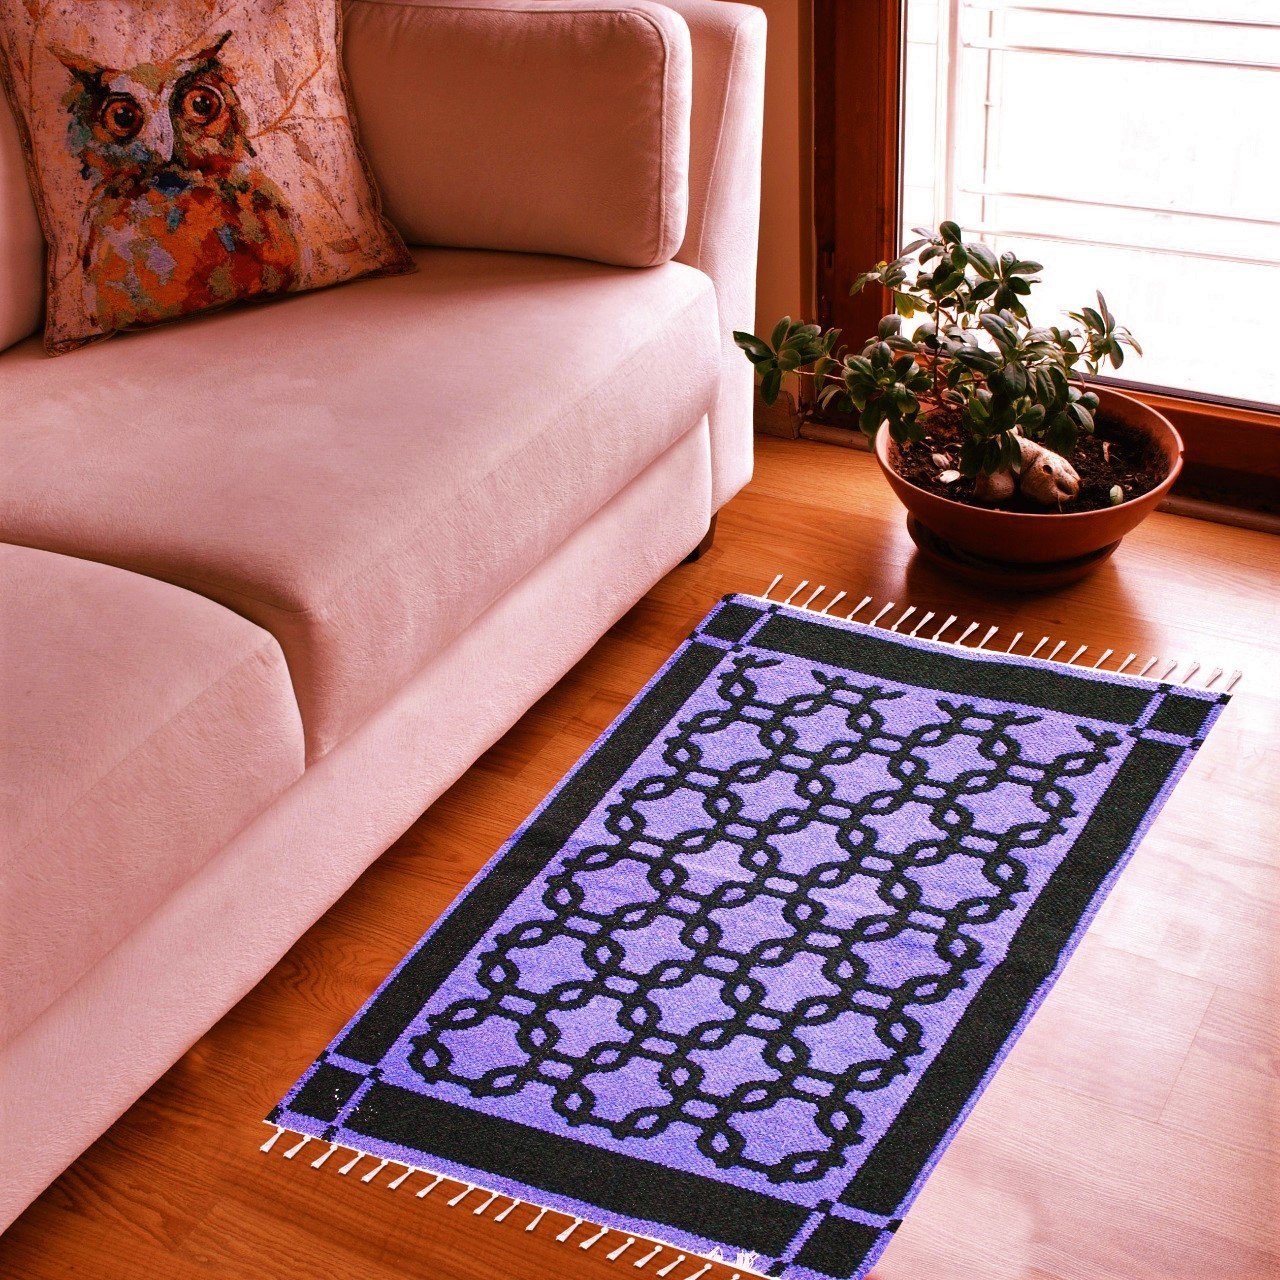 Squared - Hand-woven Woolen Rug - Double Seam - 2' x 3' - waseeh.com